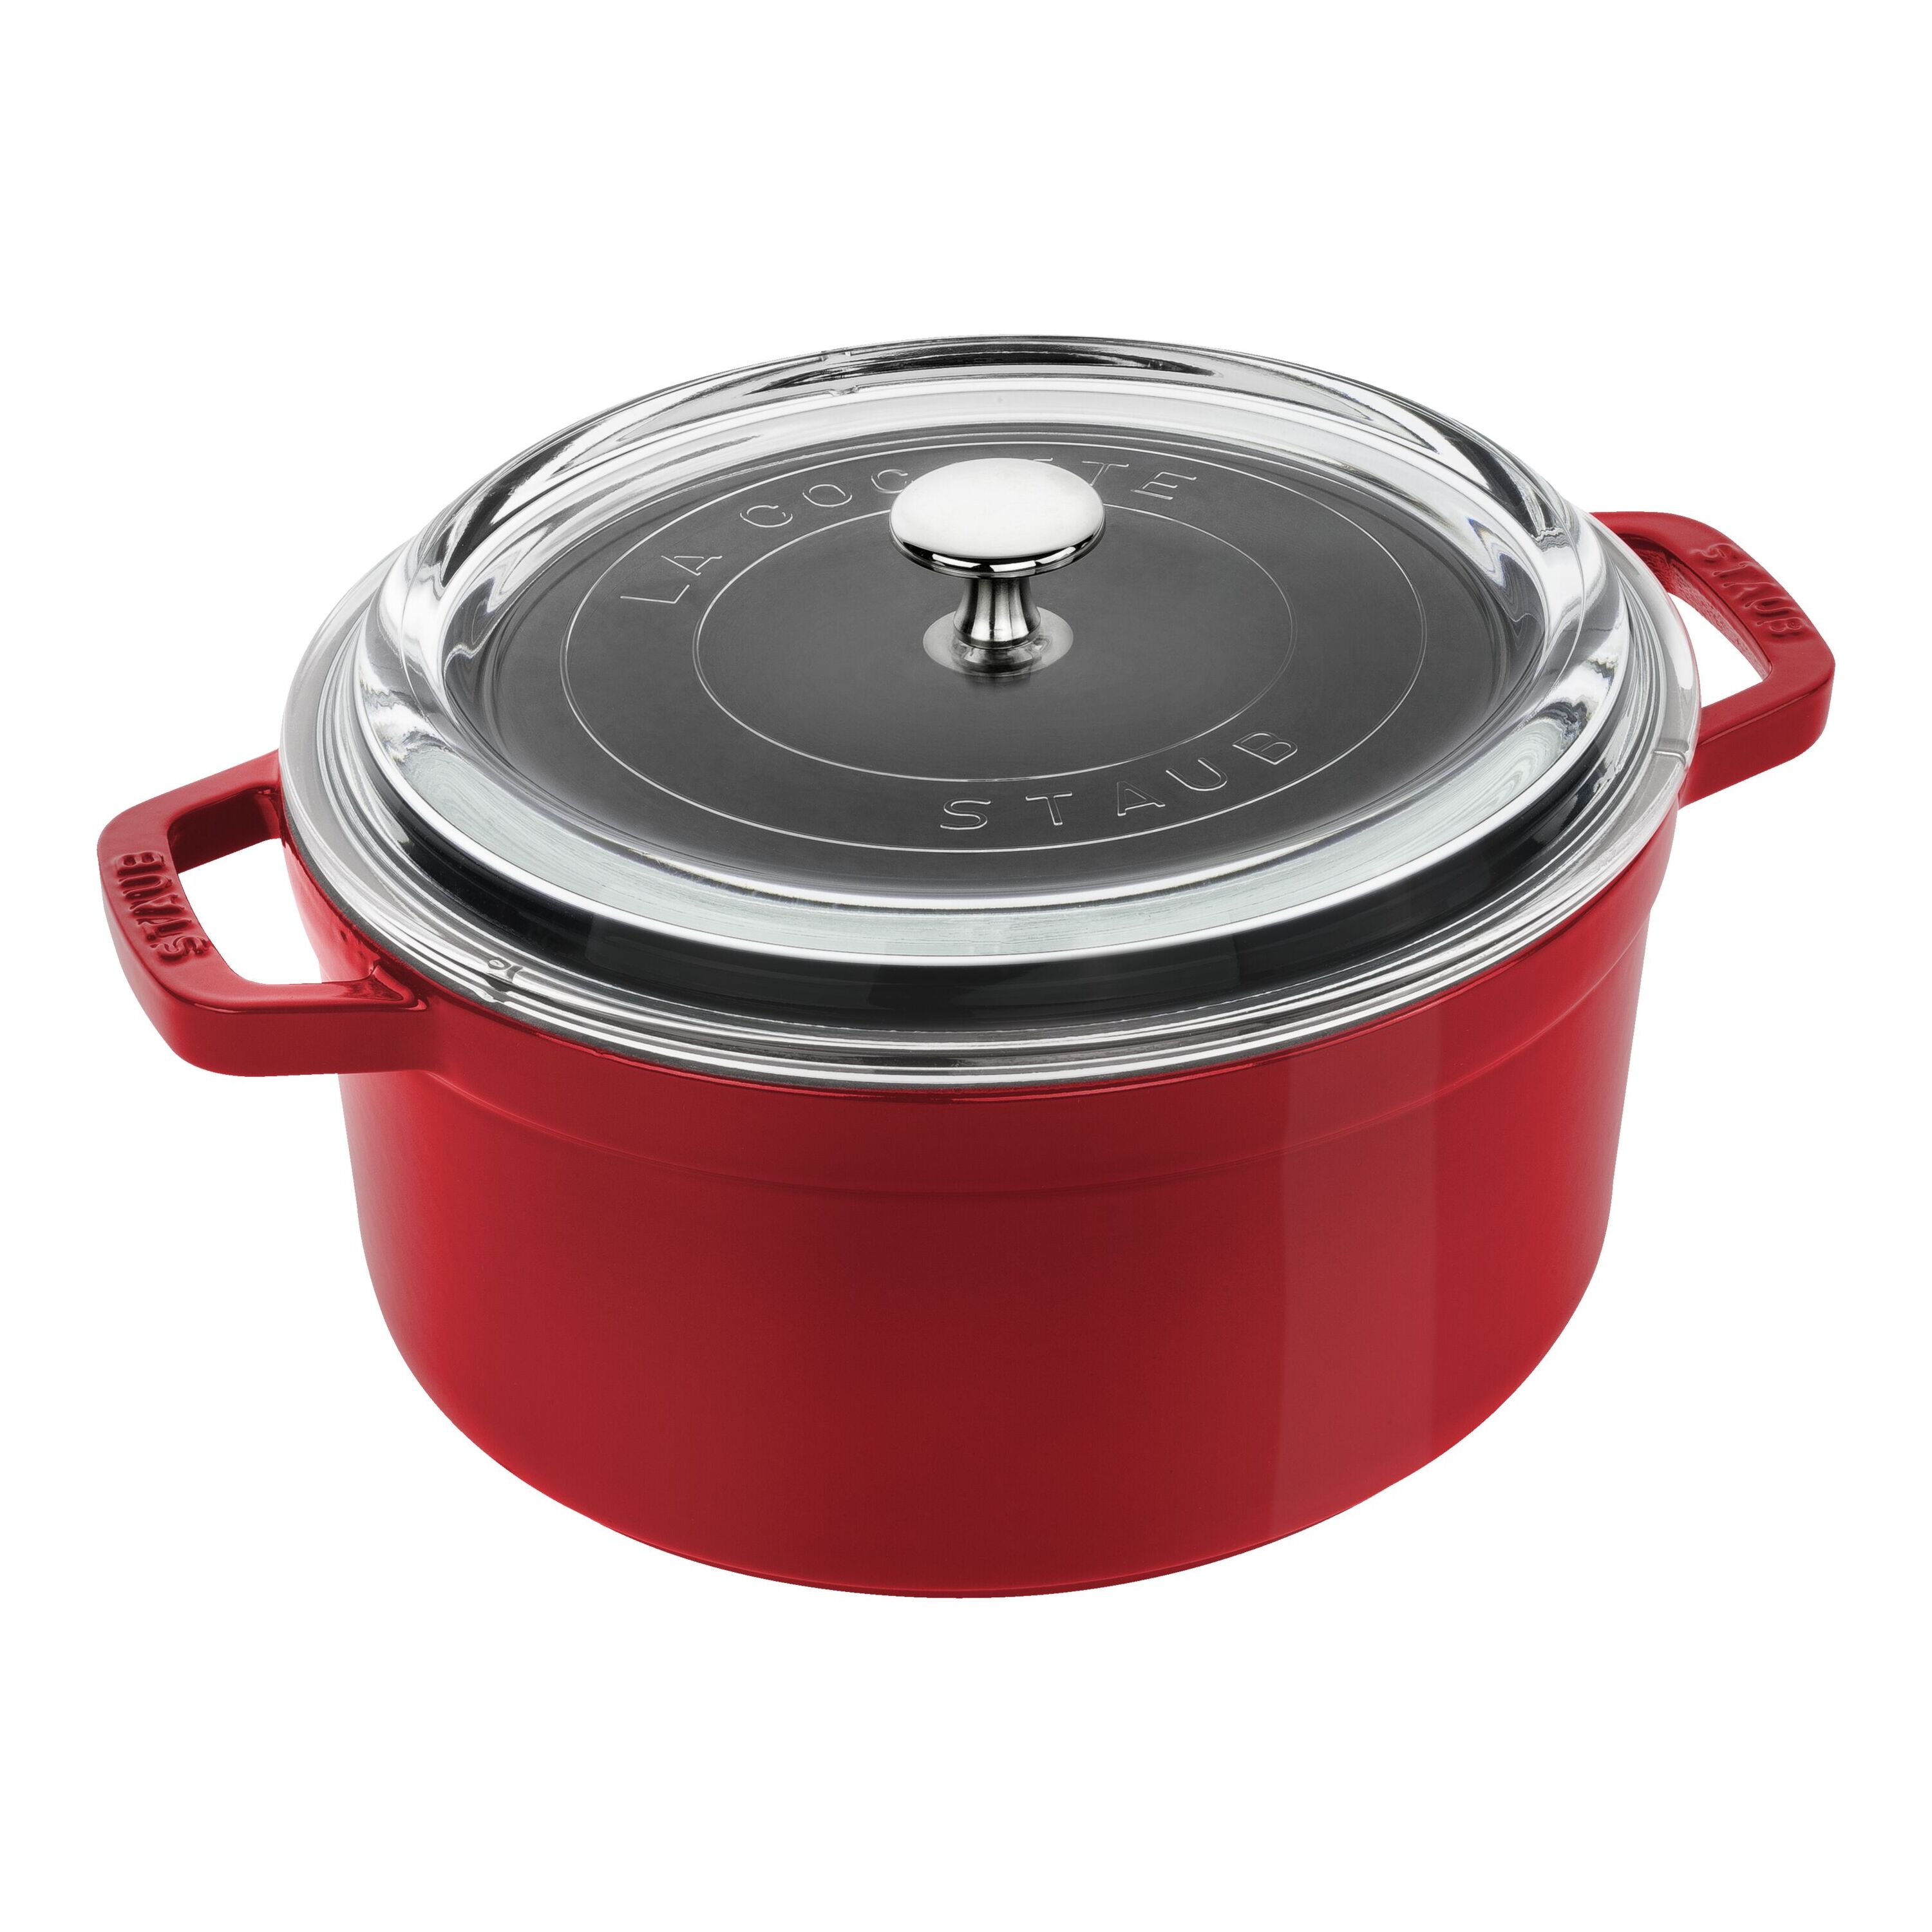 Better Chef 5 qt. Round Aluminum Nonstick Dutch Oven in Red with Glass Lid